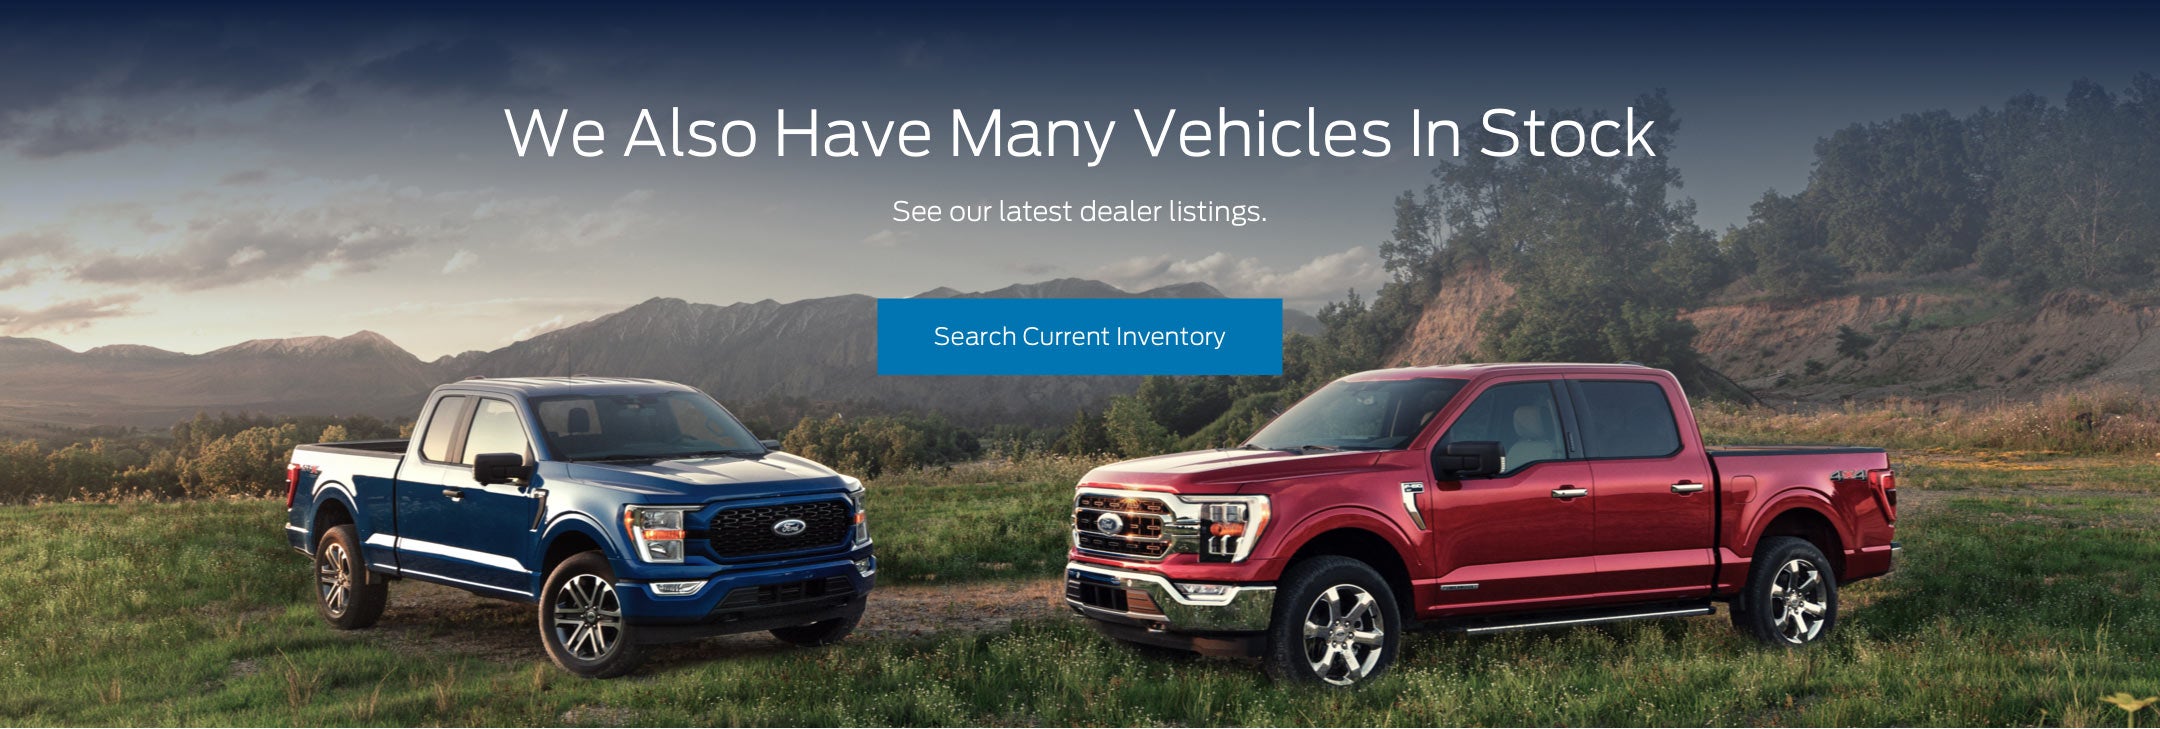 Ford vehicles in stock | Wendle Ford Sales in Spokane WA